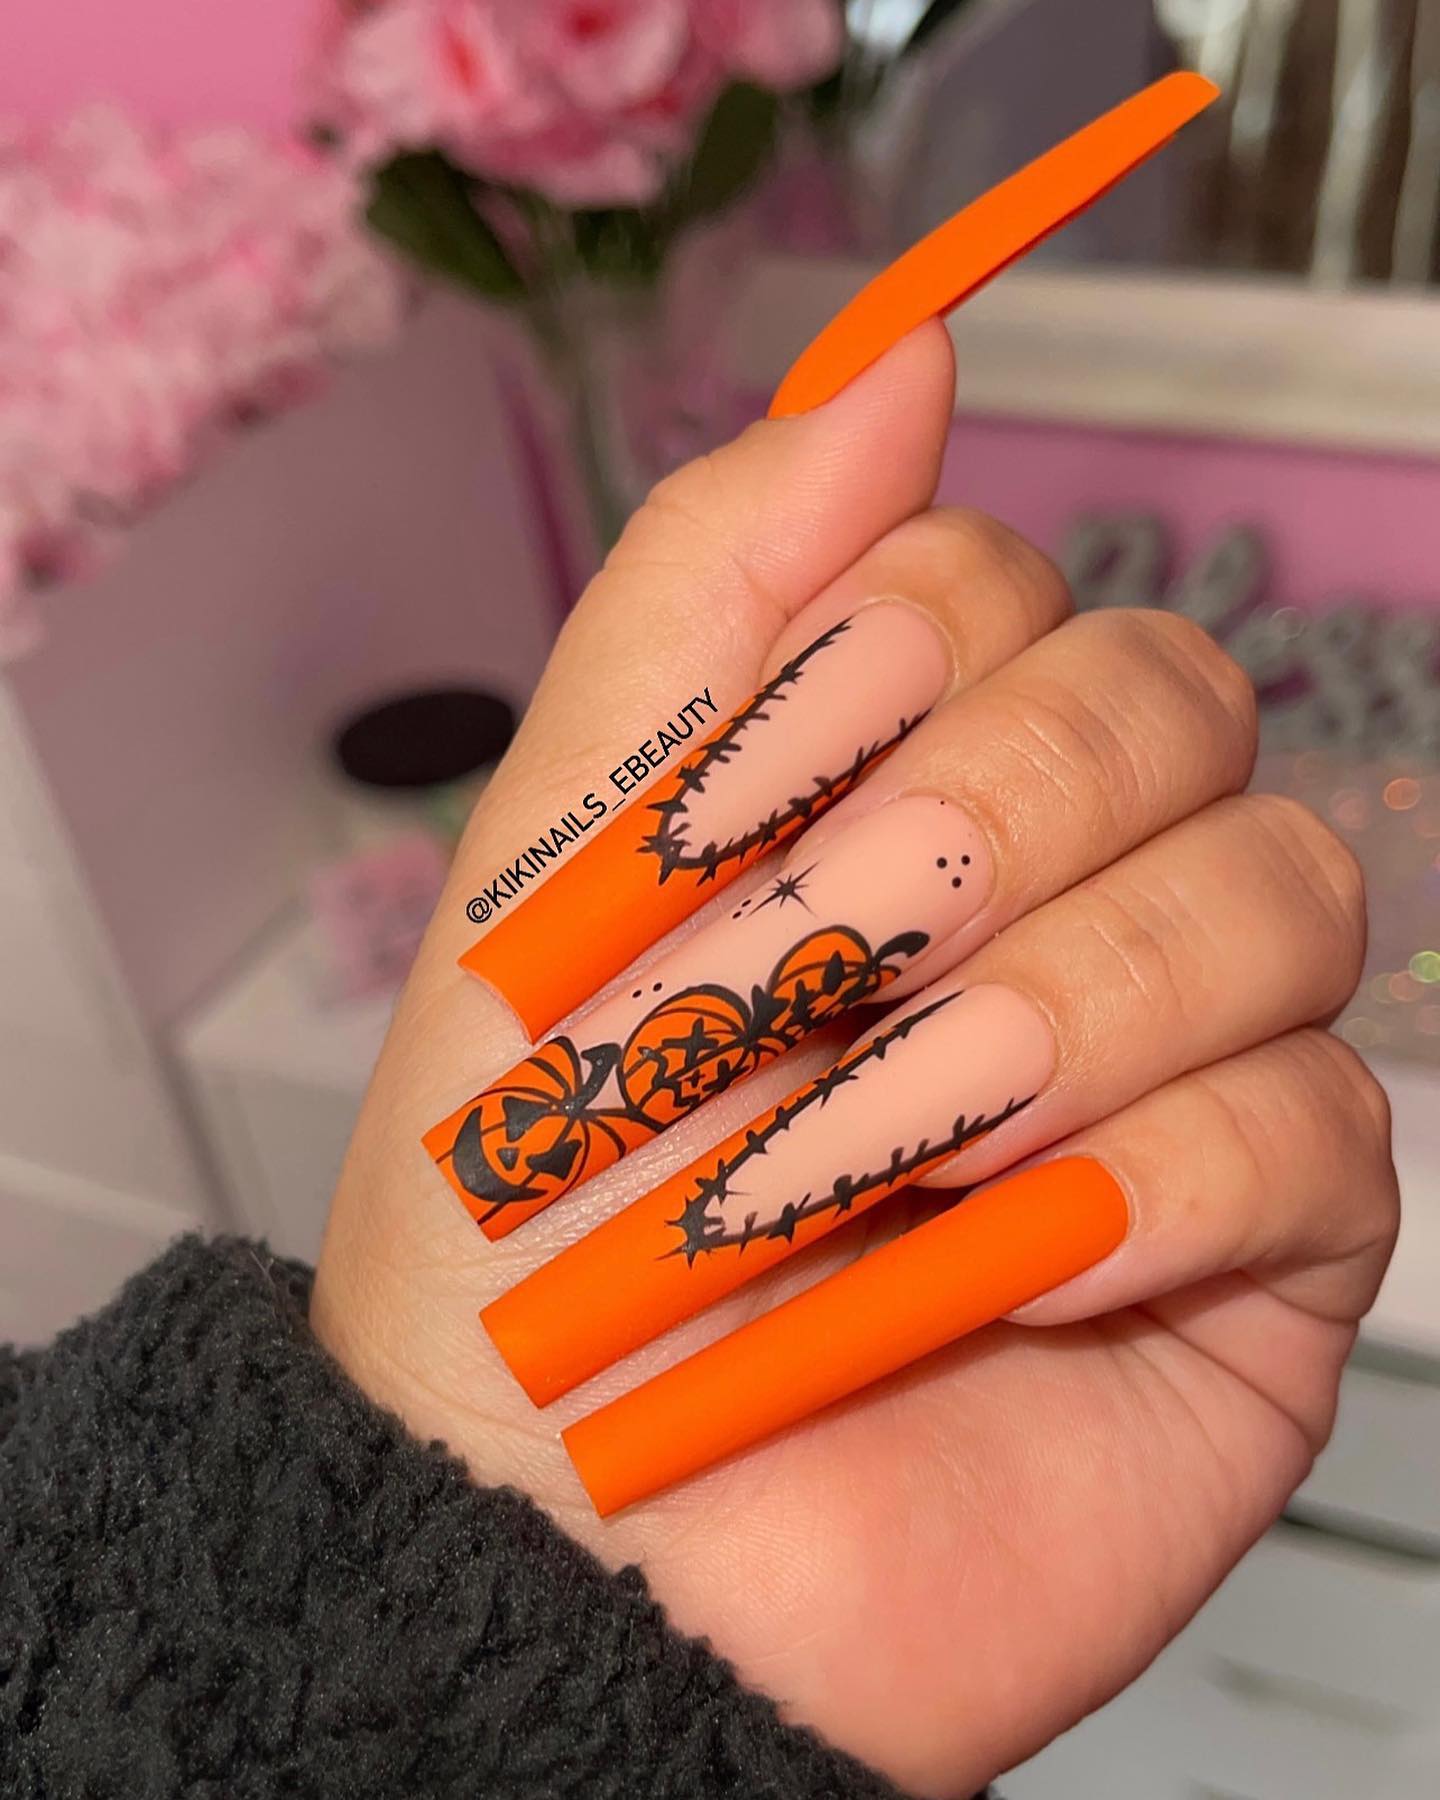 Long acrylic nails are always there to amaze everyone you come across but you know... There is always something more to add. Go for a bright orange matte nail polish and draw barbed wires and pumpkins if you want to be ready for Halloween to the fullest.